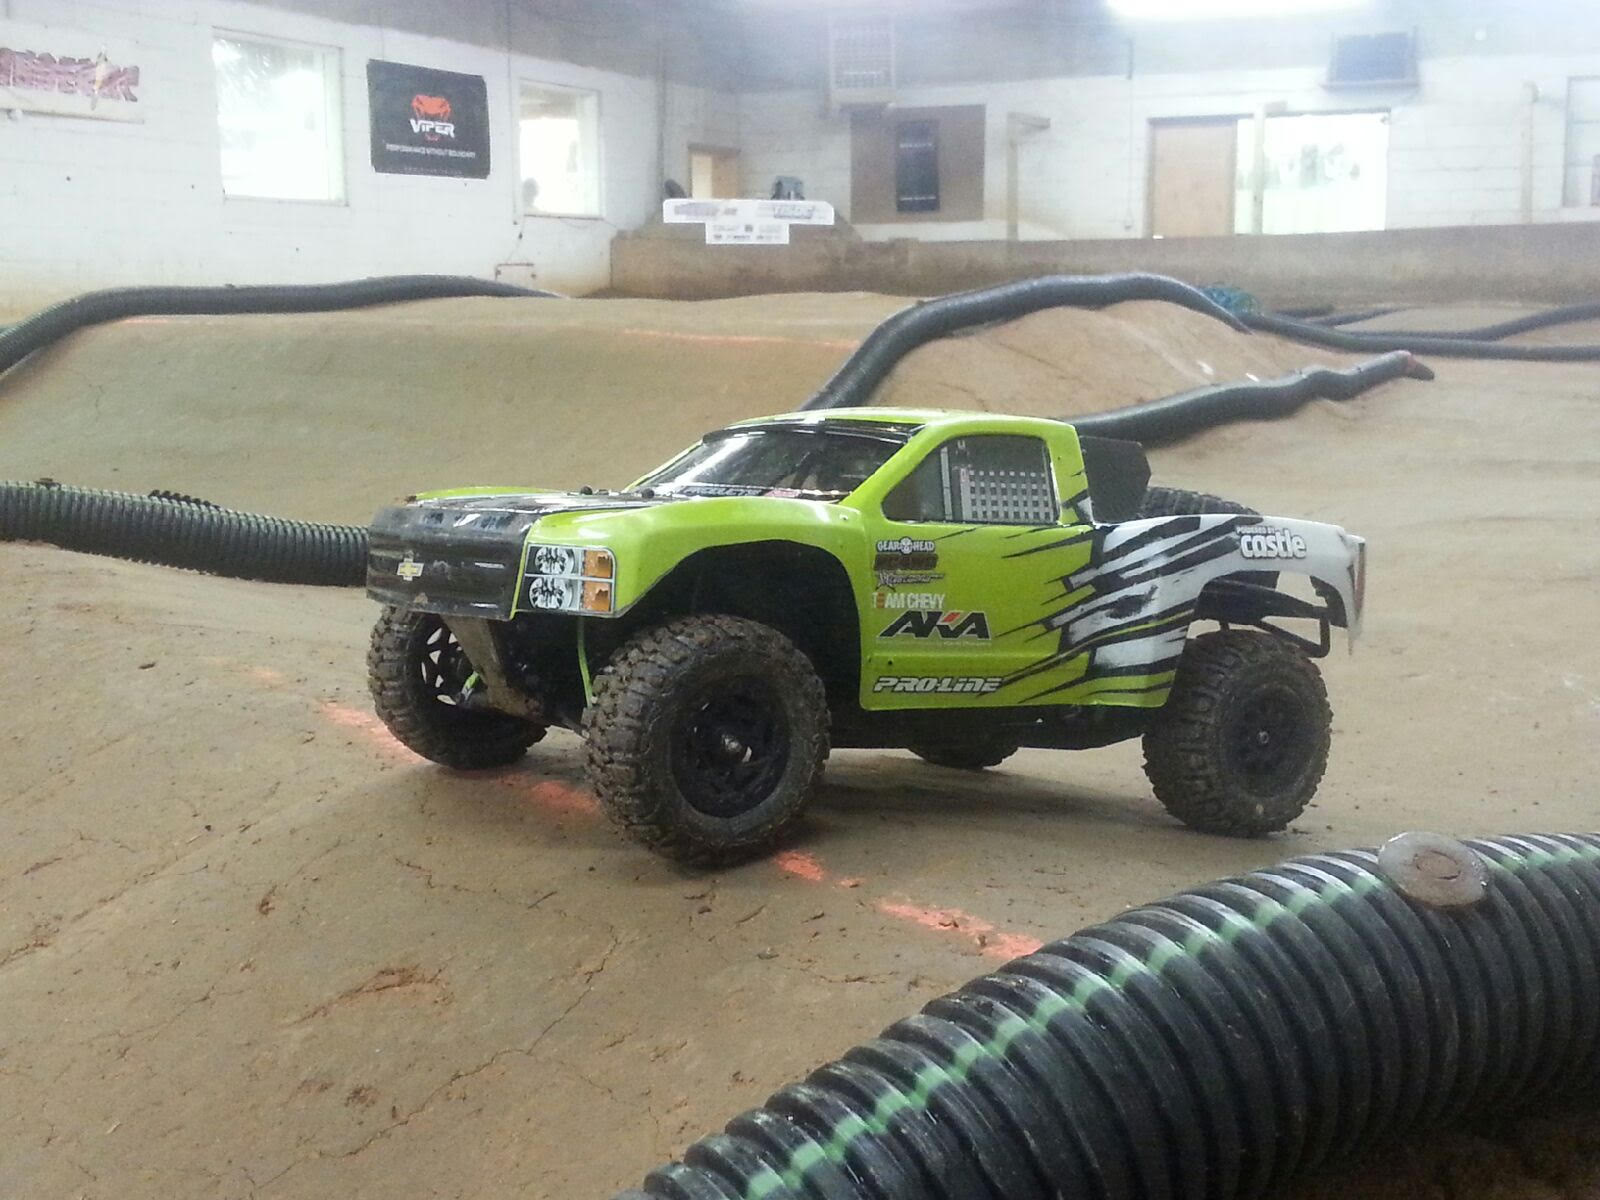 axial yeti trophy truck conversion